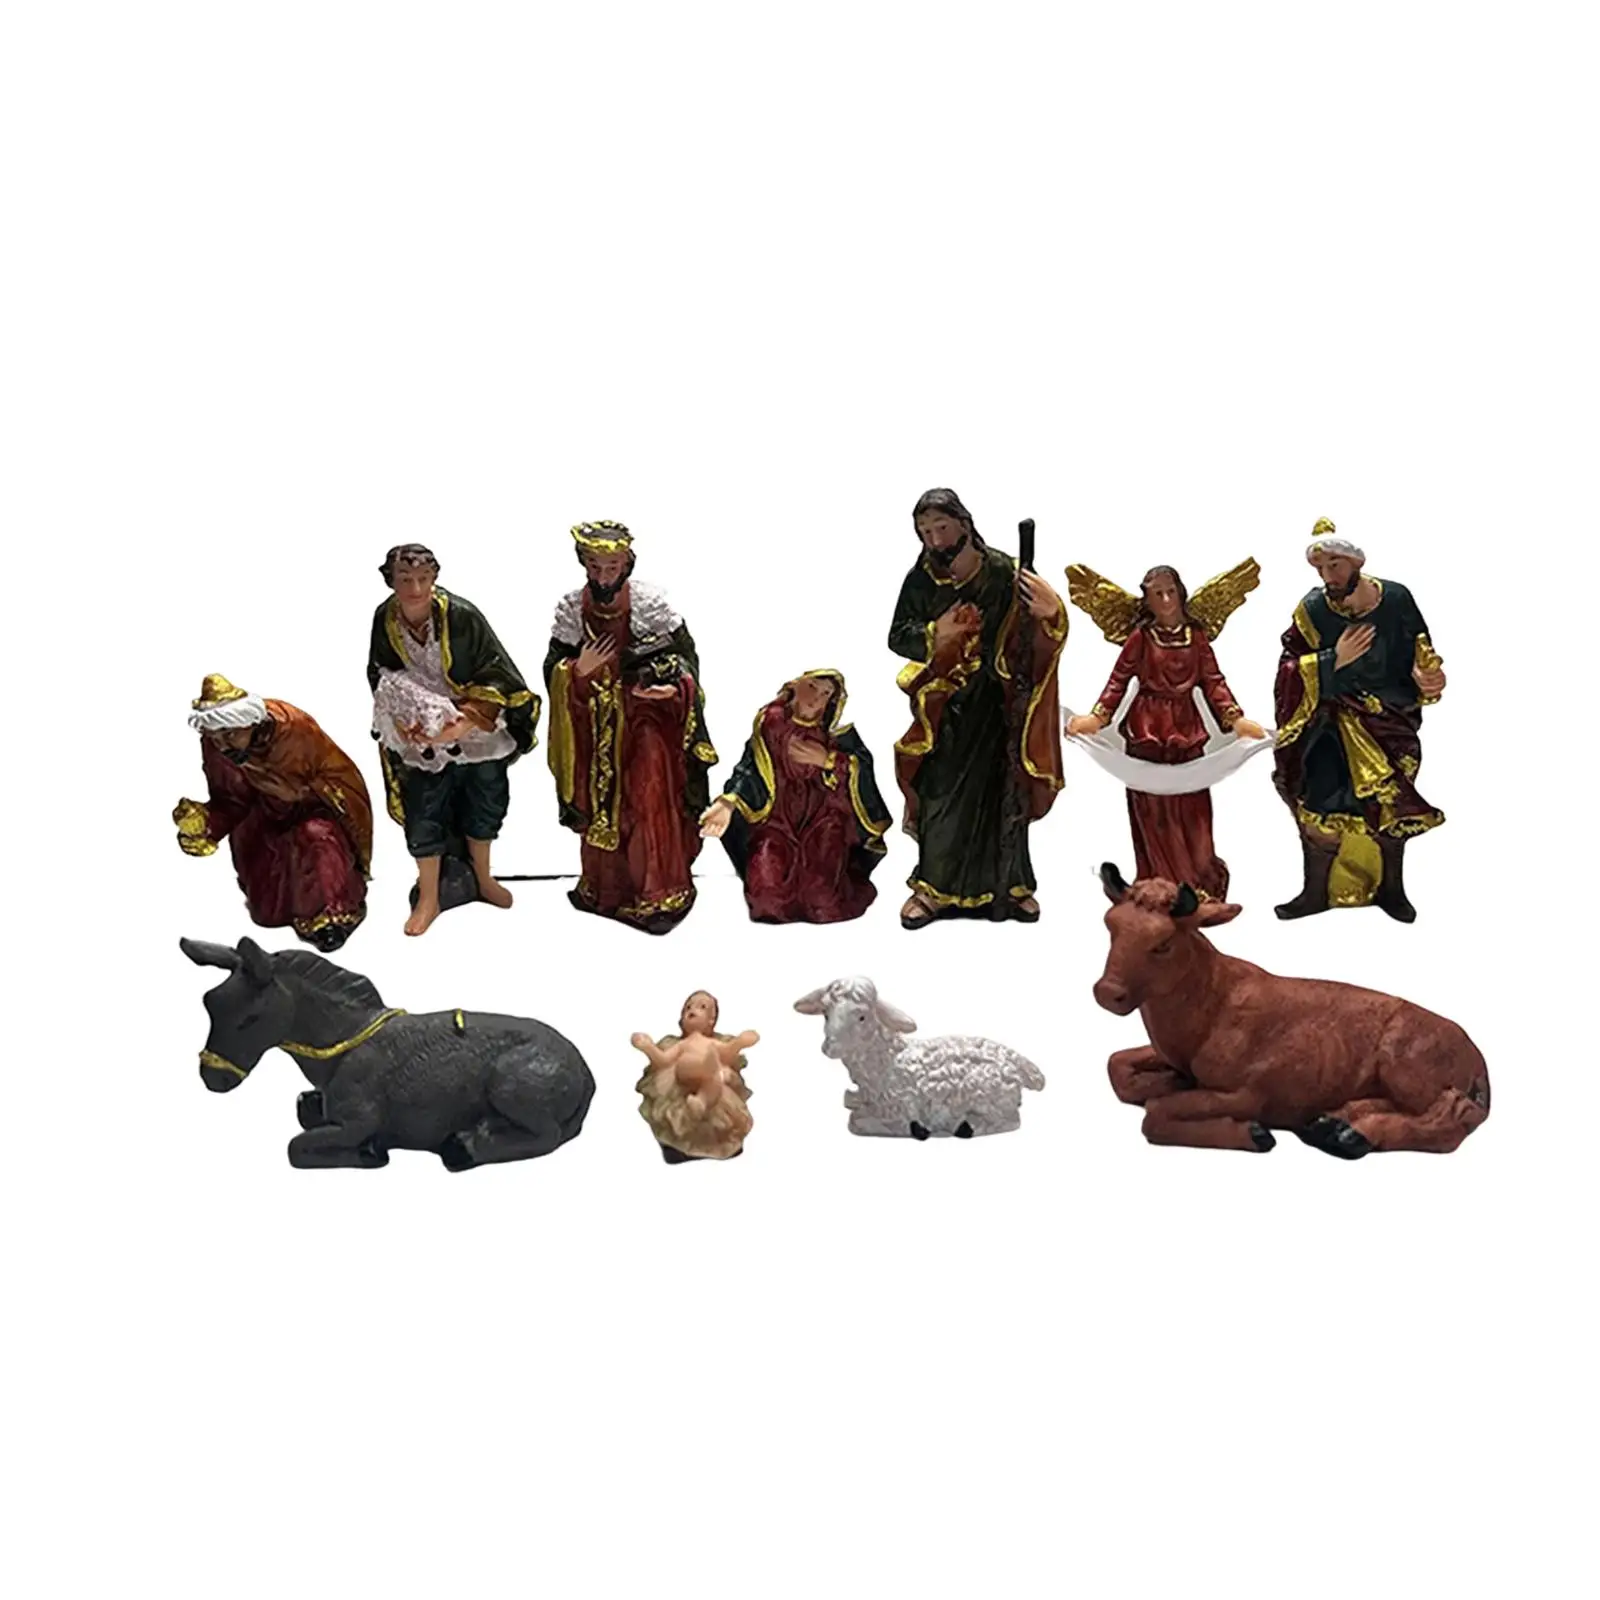 11 Pieces Nativity Scene Figures Xmas Vintage Style Collection Christmas